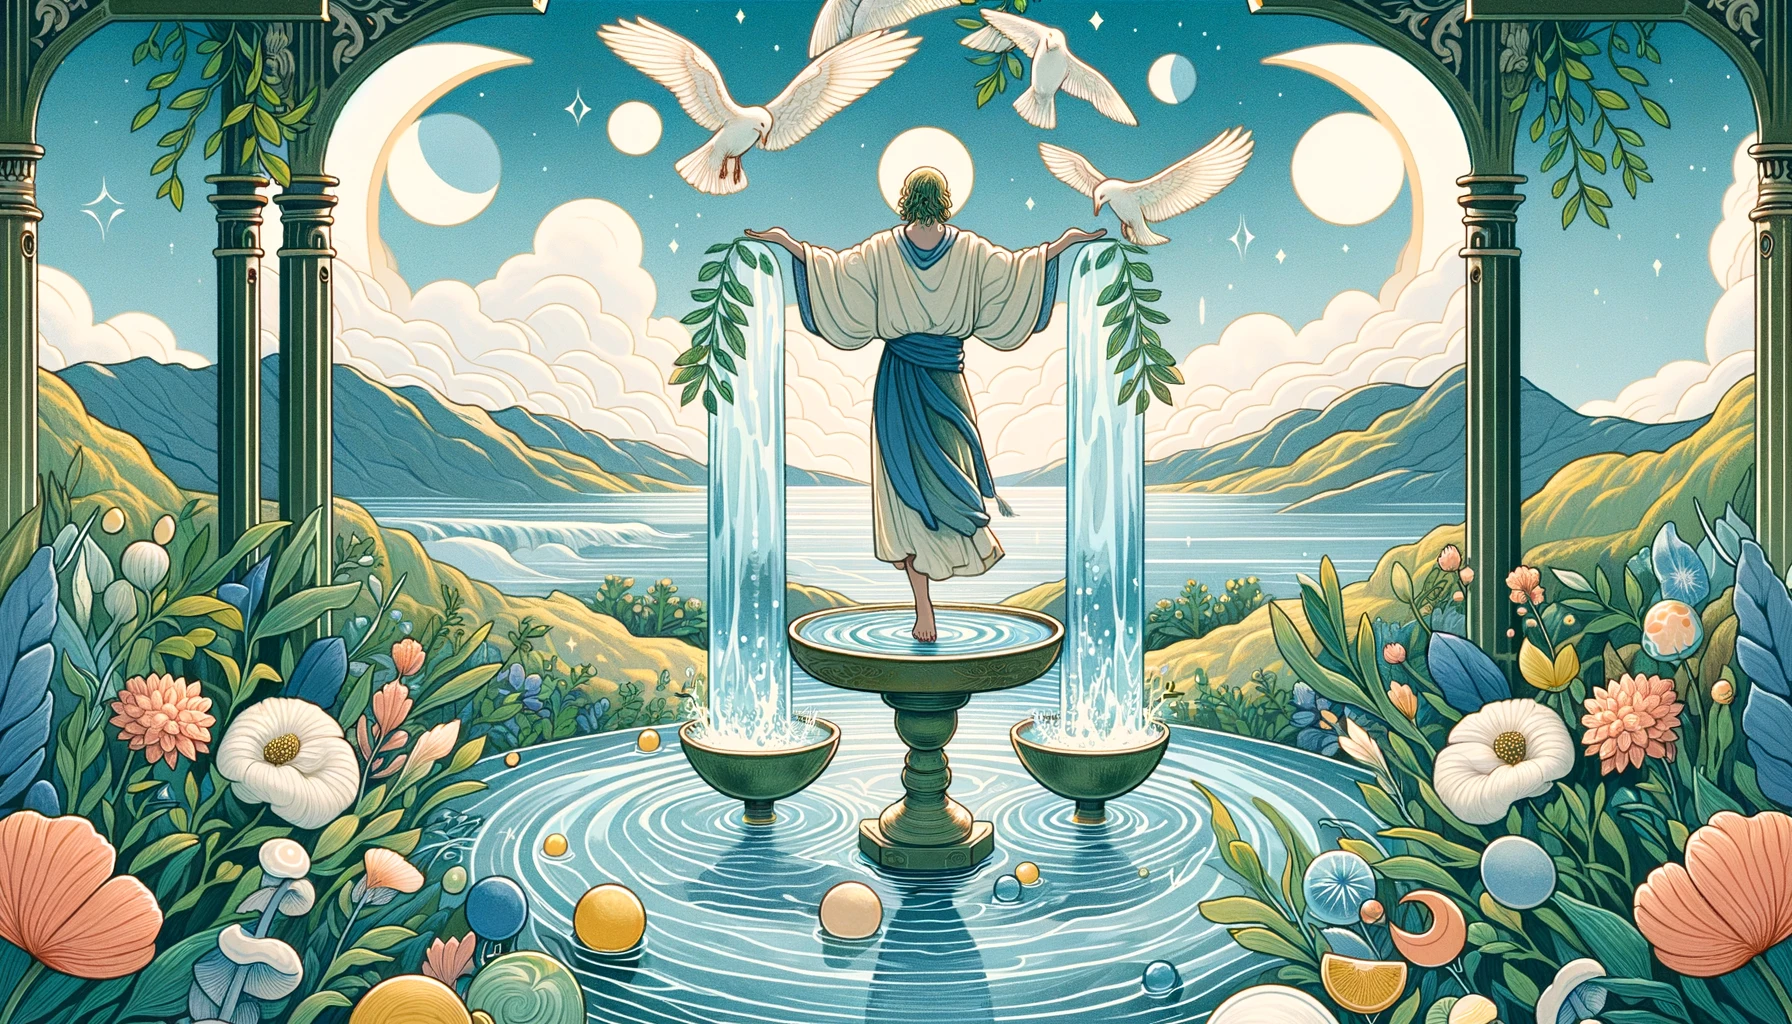 "In a serene setting, a figure balances water between two vessels, symbolizing integration and equilibrium. Soft blues, greens, and whites evoke calmness and healing energy, reflecting the peaceful and optimistic mood of the Temperance card's influence."